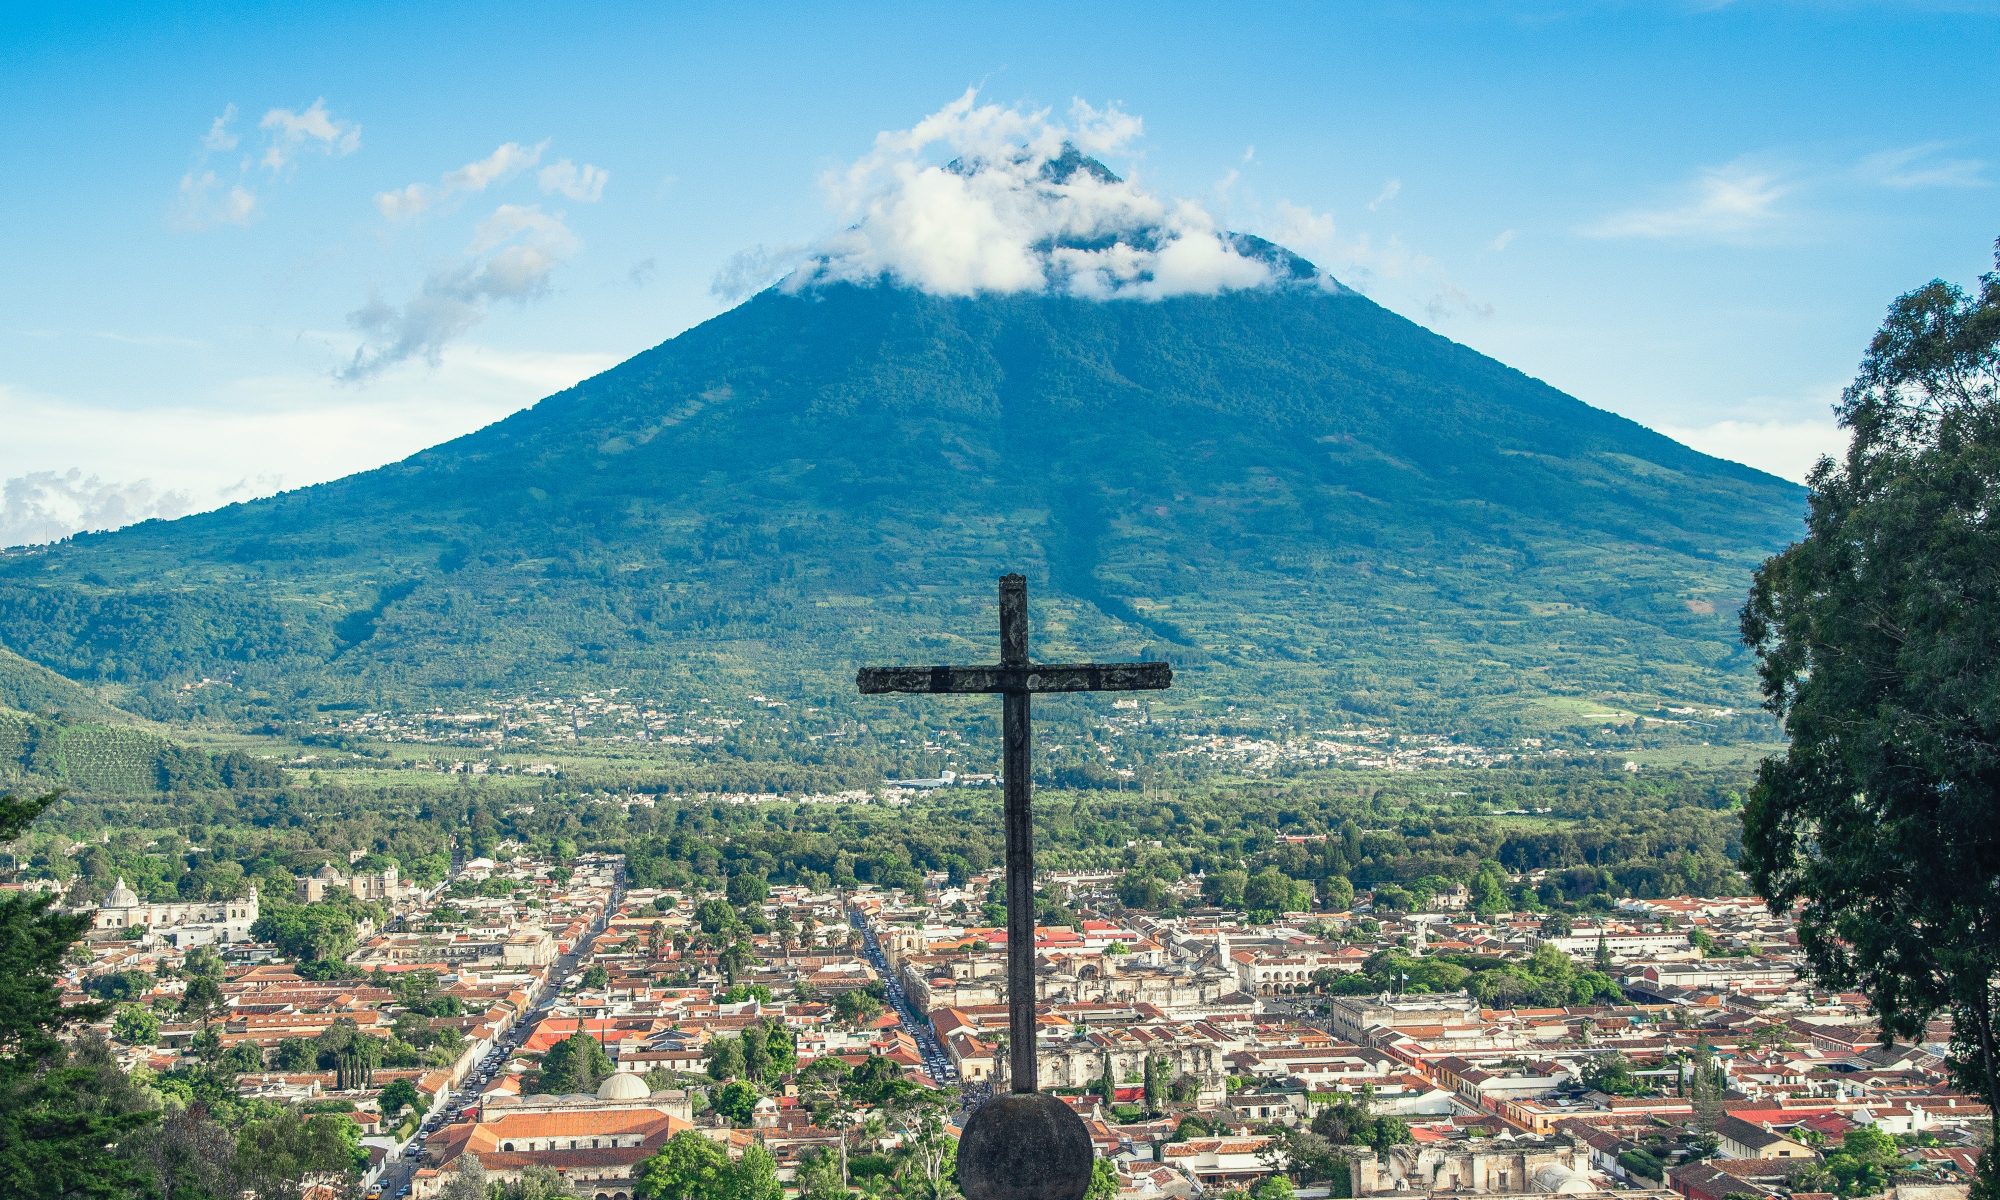 7 things you shouldn't do in Guatemala